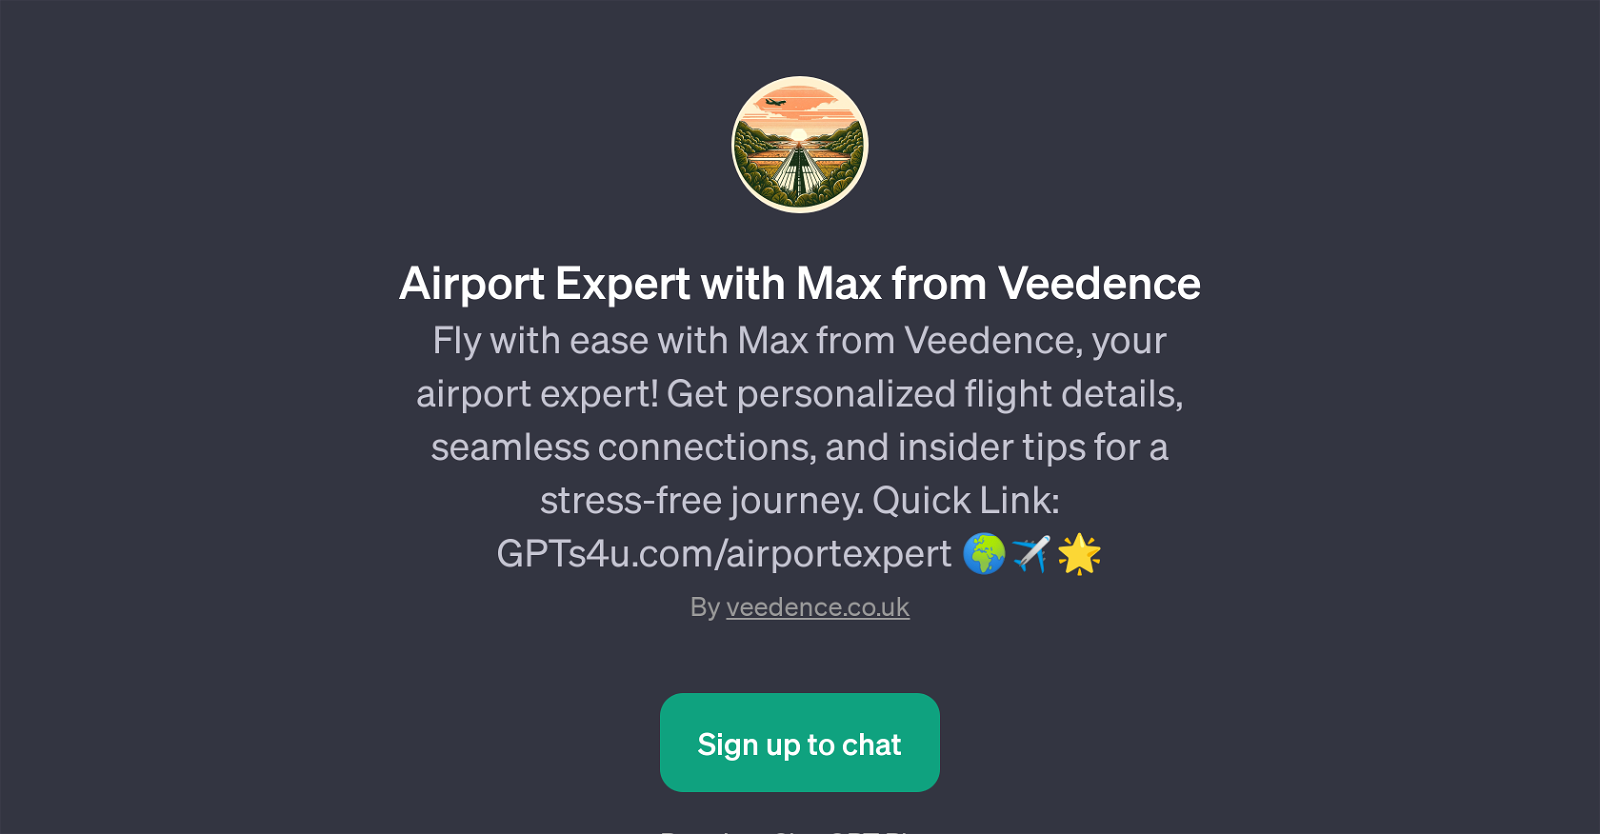 Airport Expert with Max from Veedence website